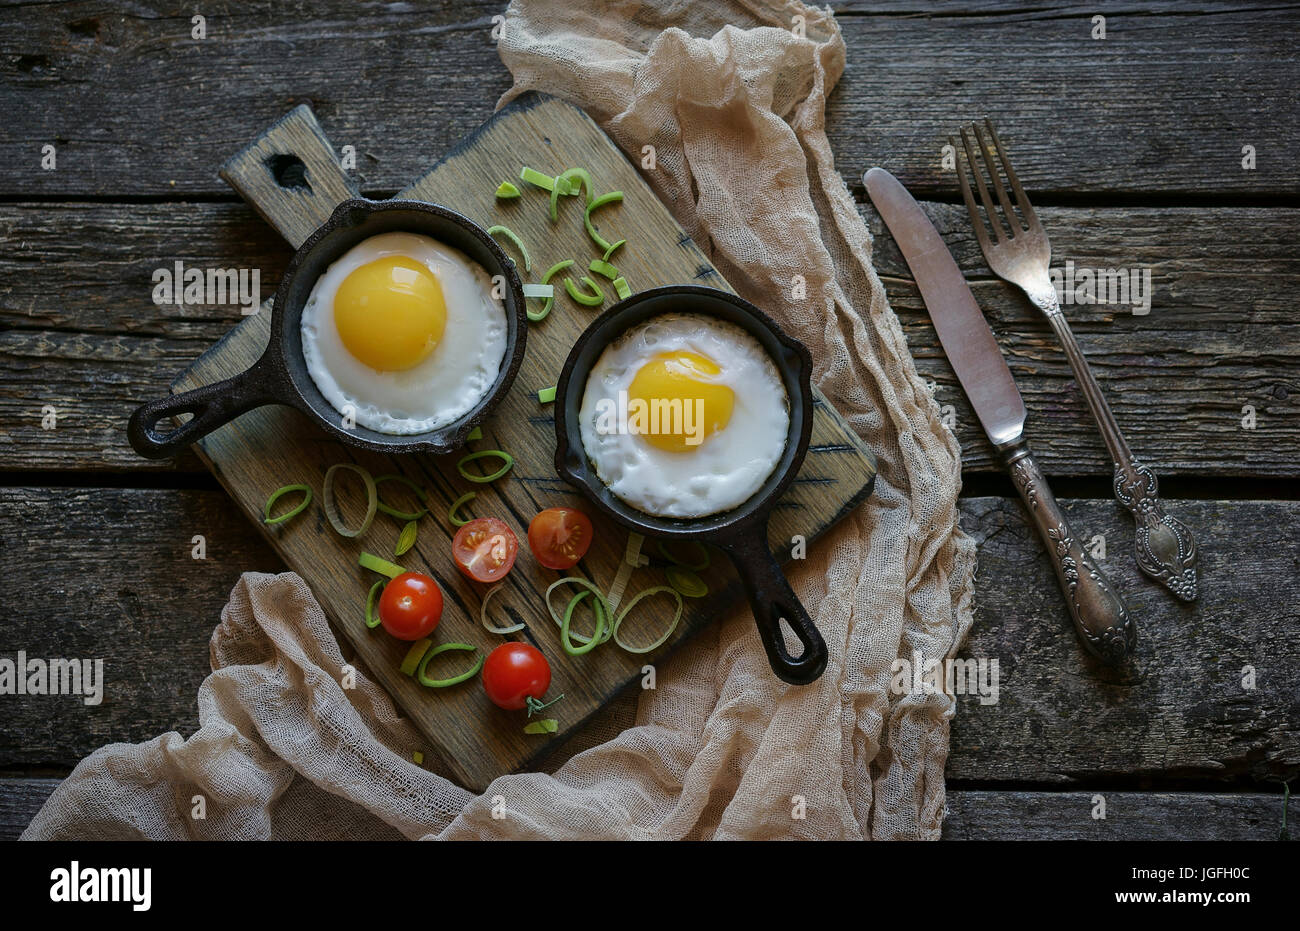 Fried eggs in cast iron pans on cutting board Stock Photo